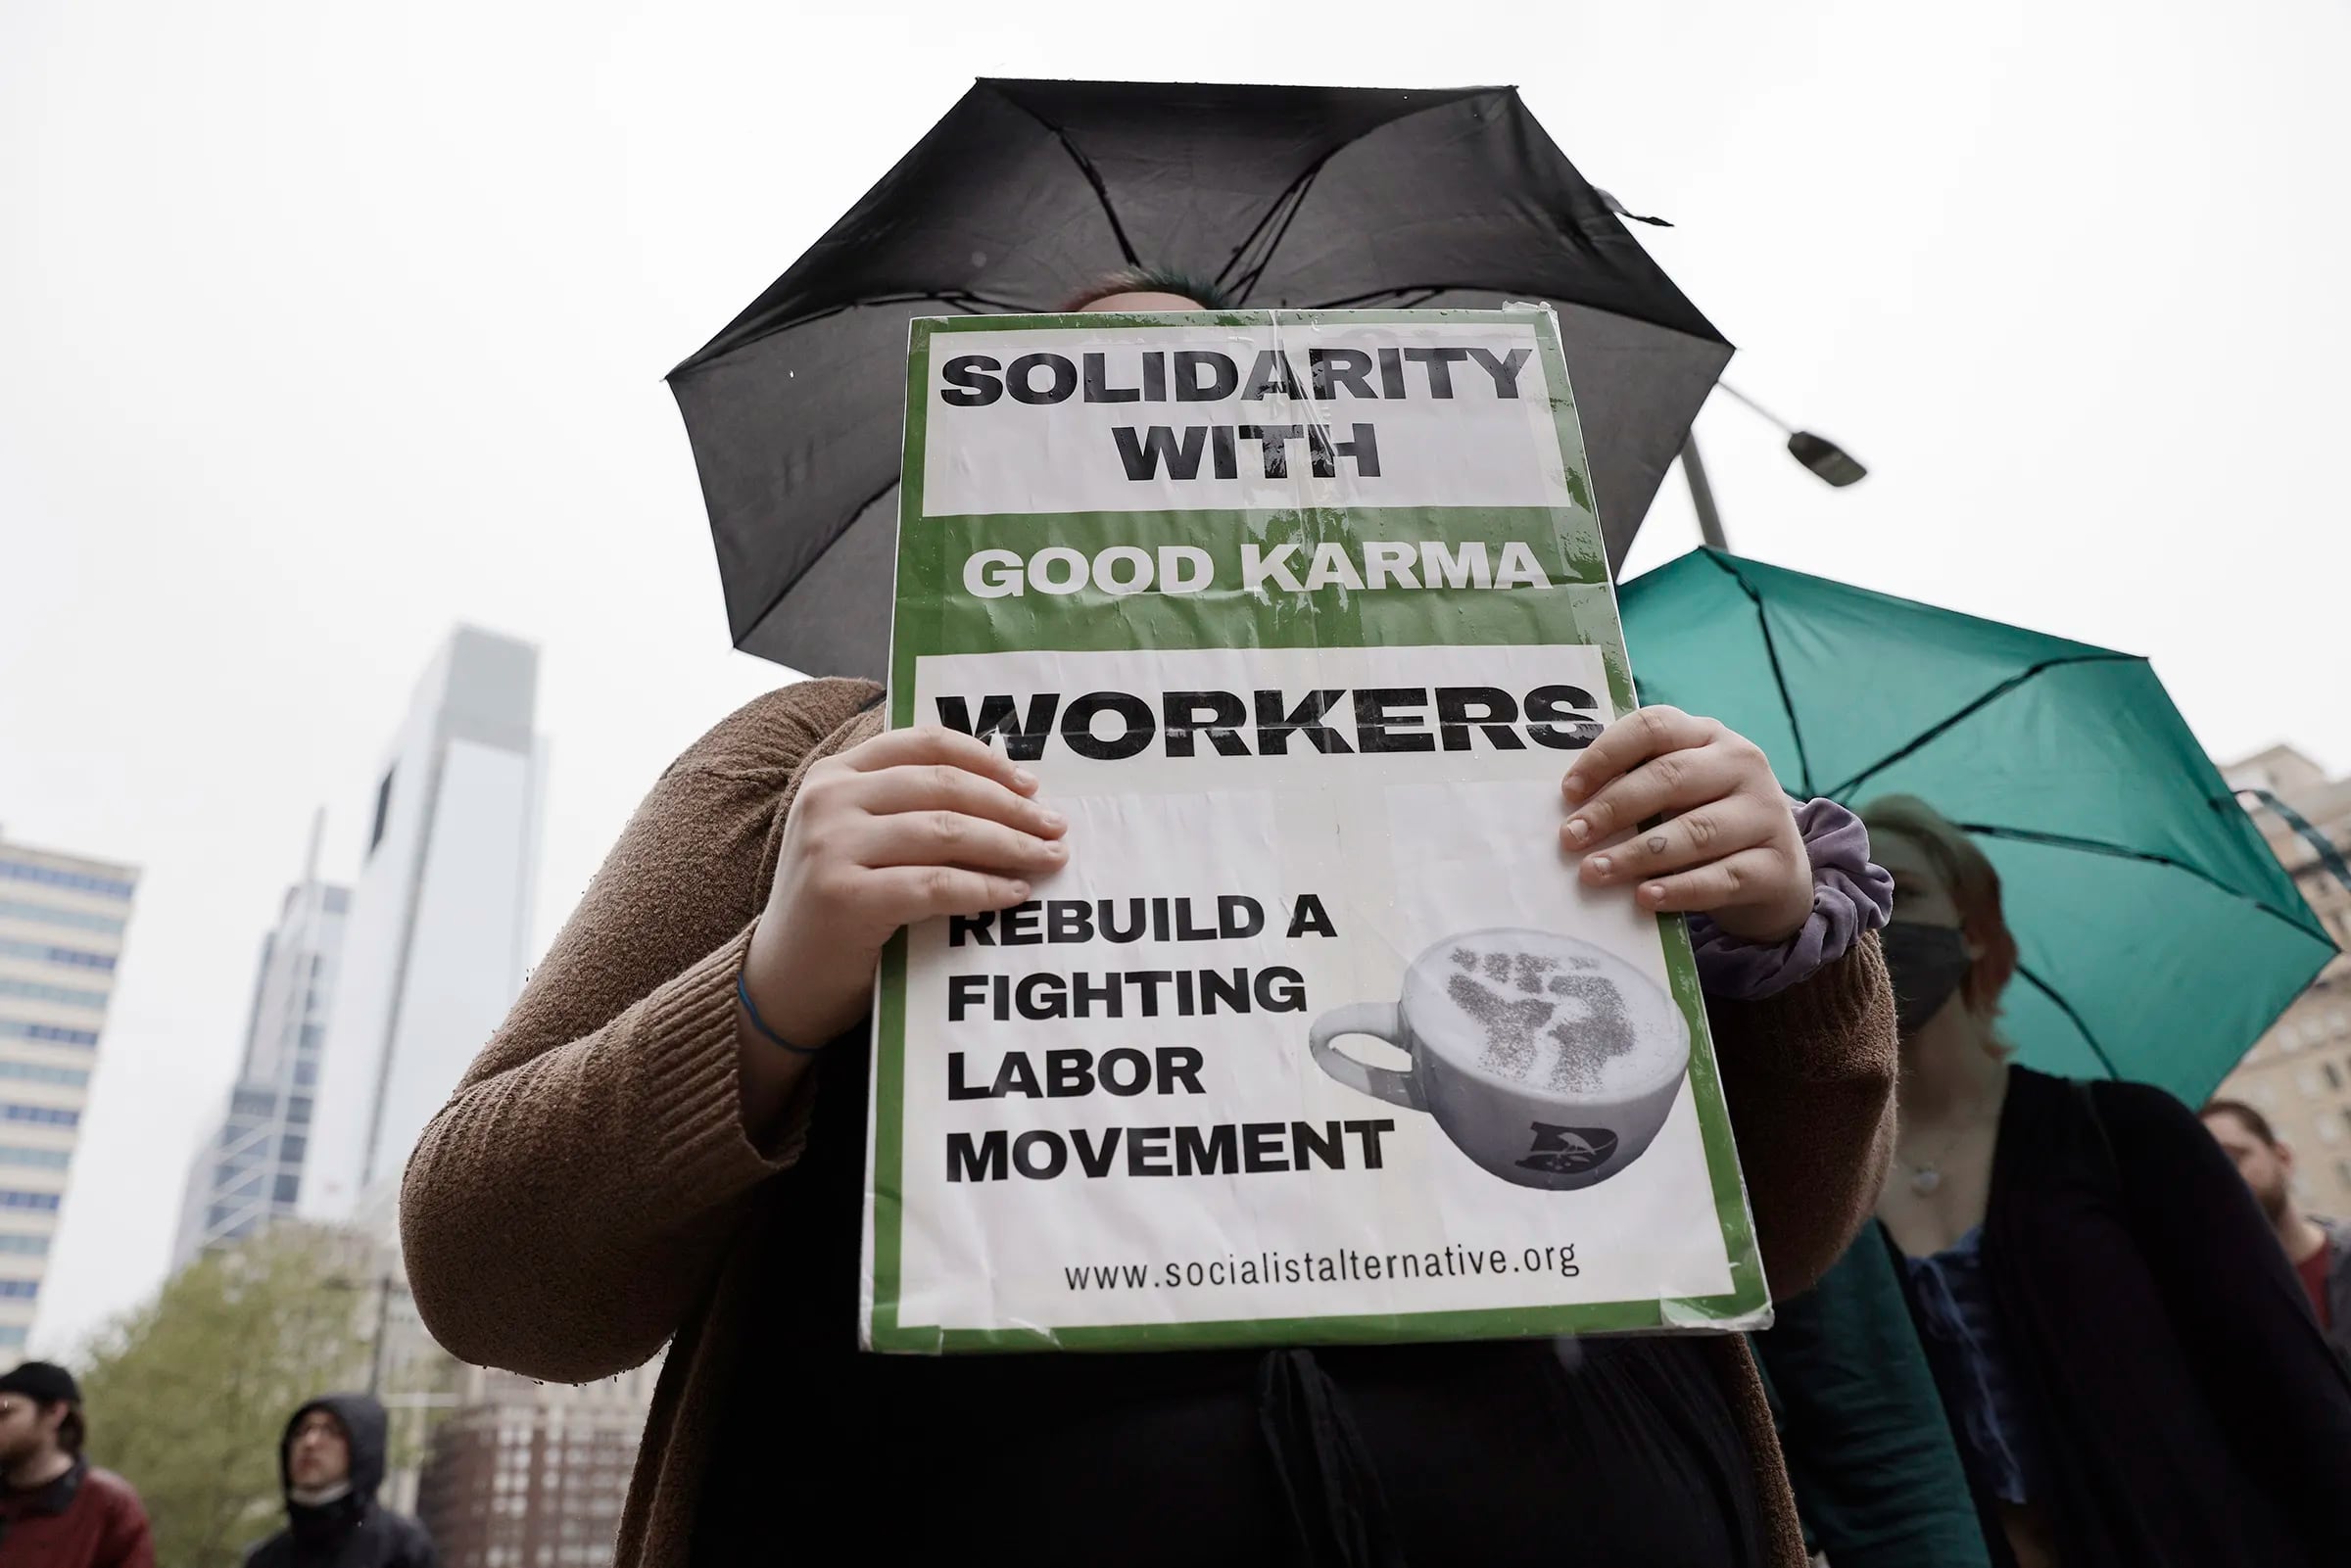 A person holds a sign supporting coffee workers at Good Karma Cafe during a rally at City Hall to support unionization among coffee workers in Philadelphia in May 2022. Less than 18 months after voting to unionize, workers voted to decertify in September.